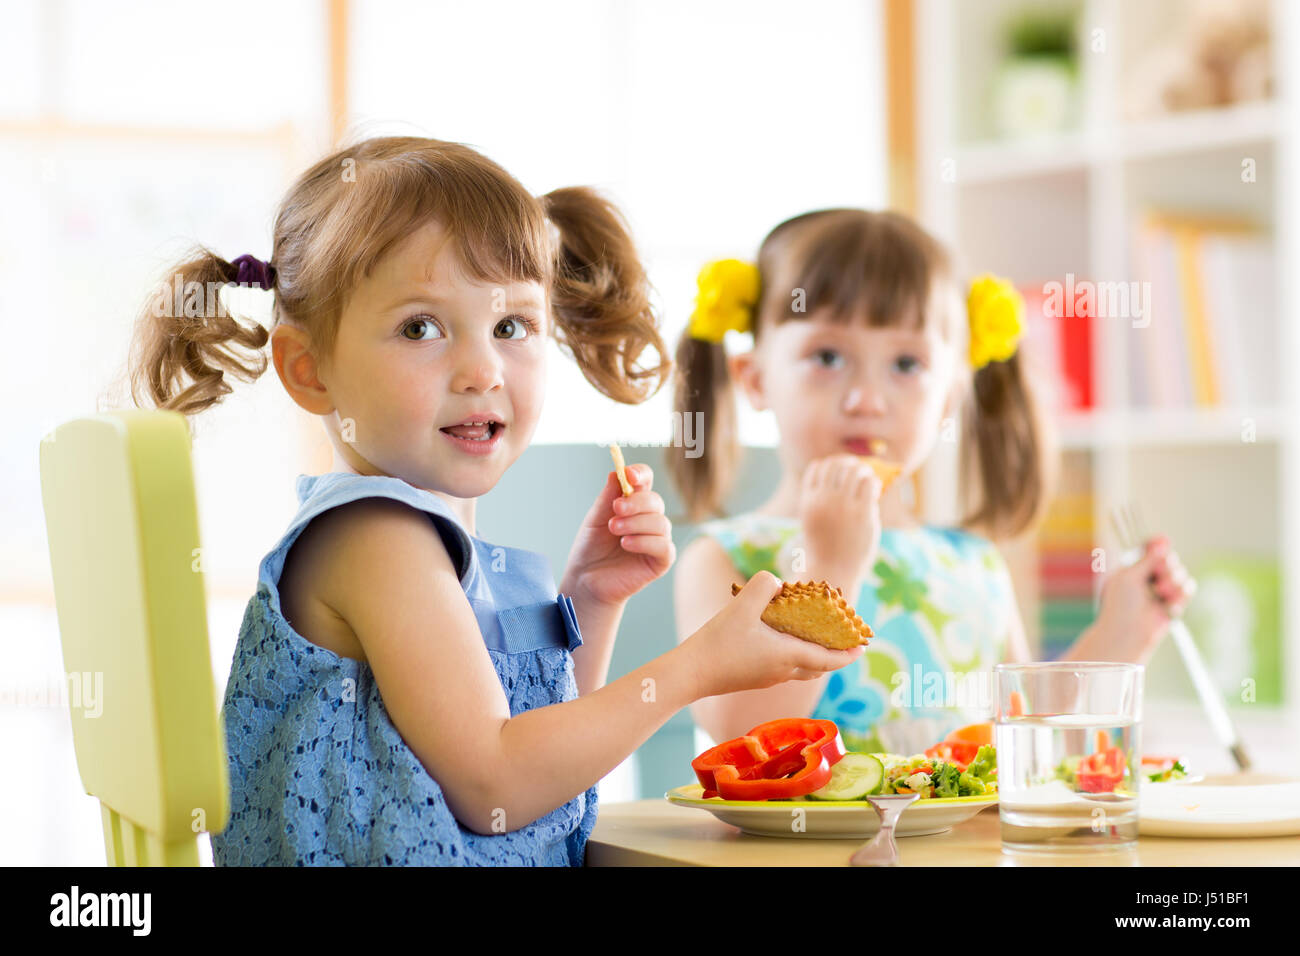 Children eating from plates in day care centre Stock Photo